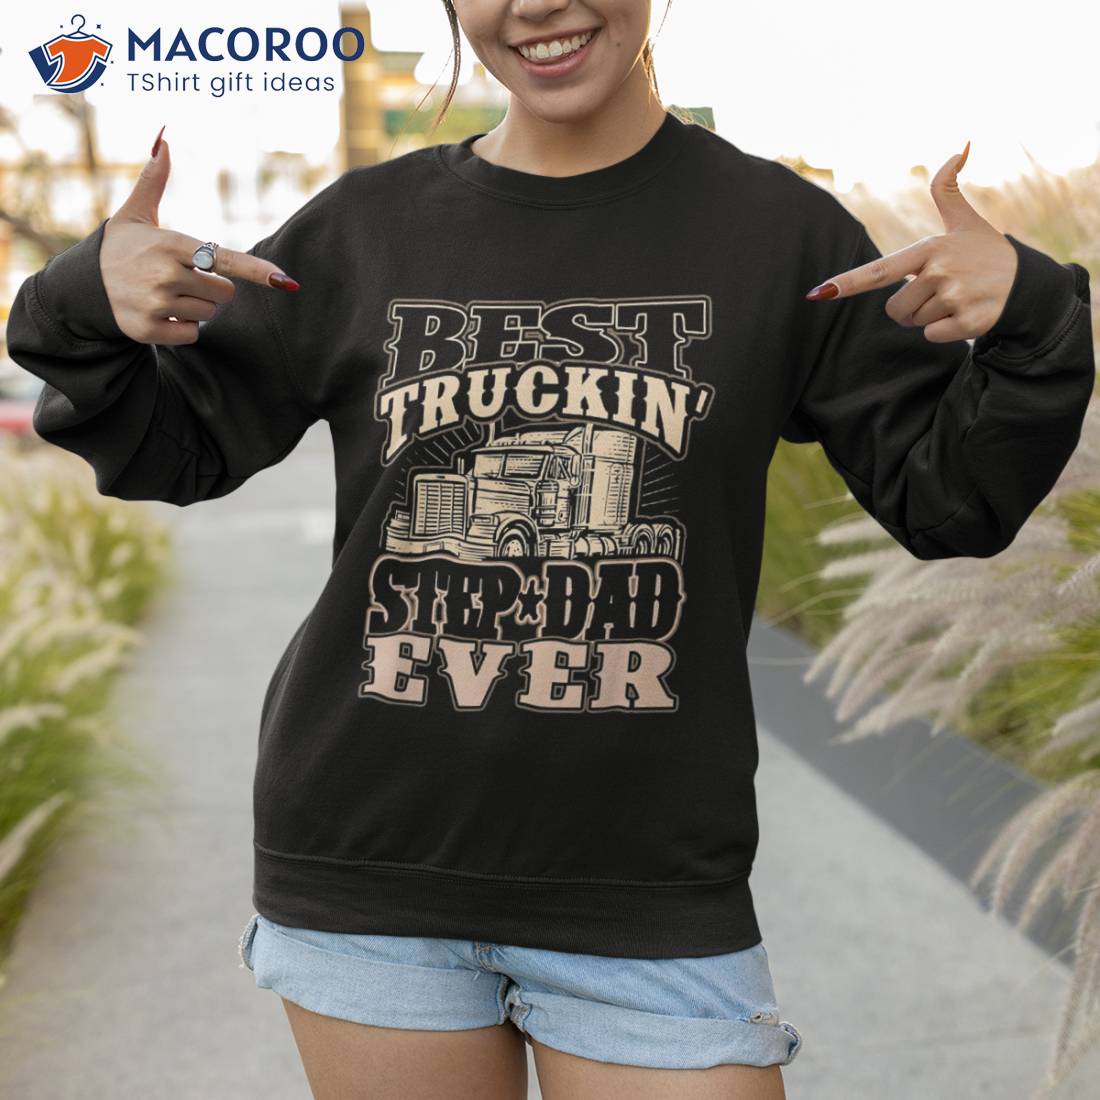 Awesome Gifts for Truck Drivers Top Trucking Ideas! 